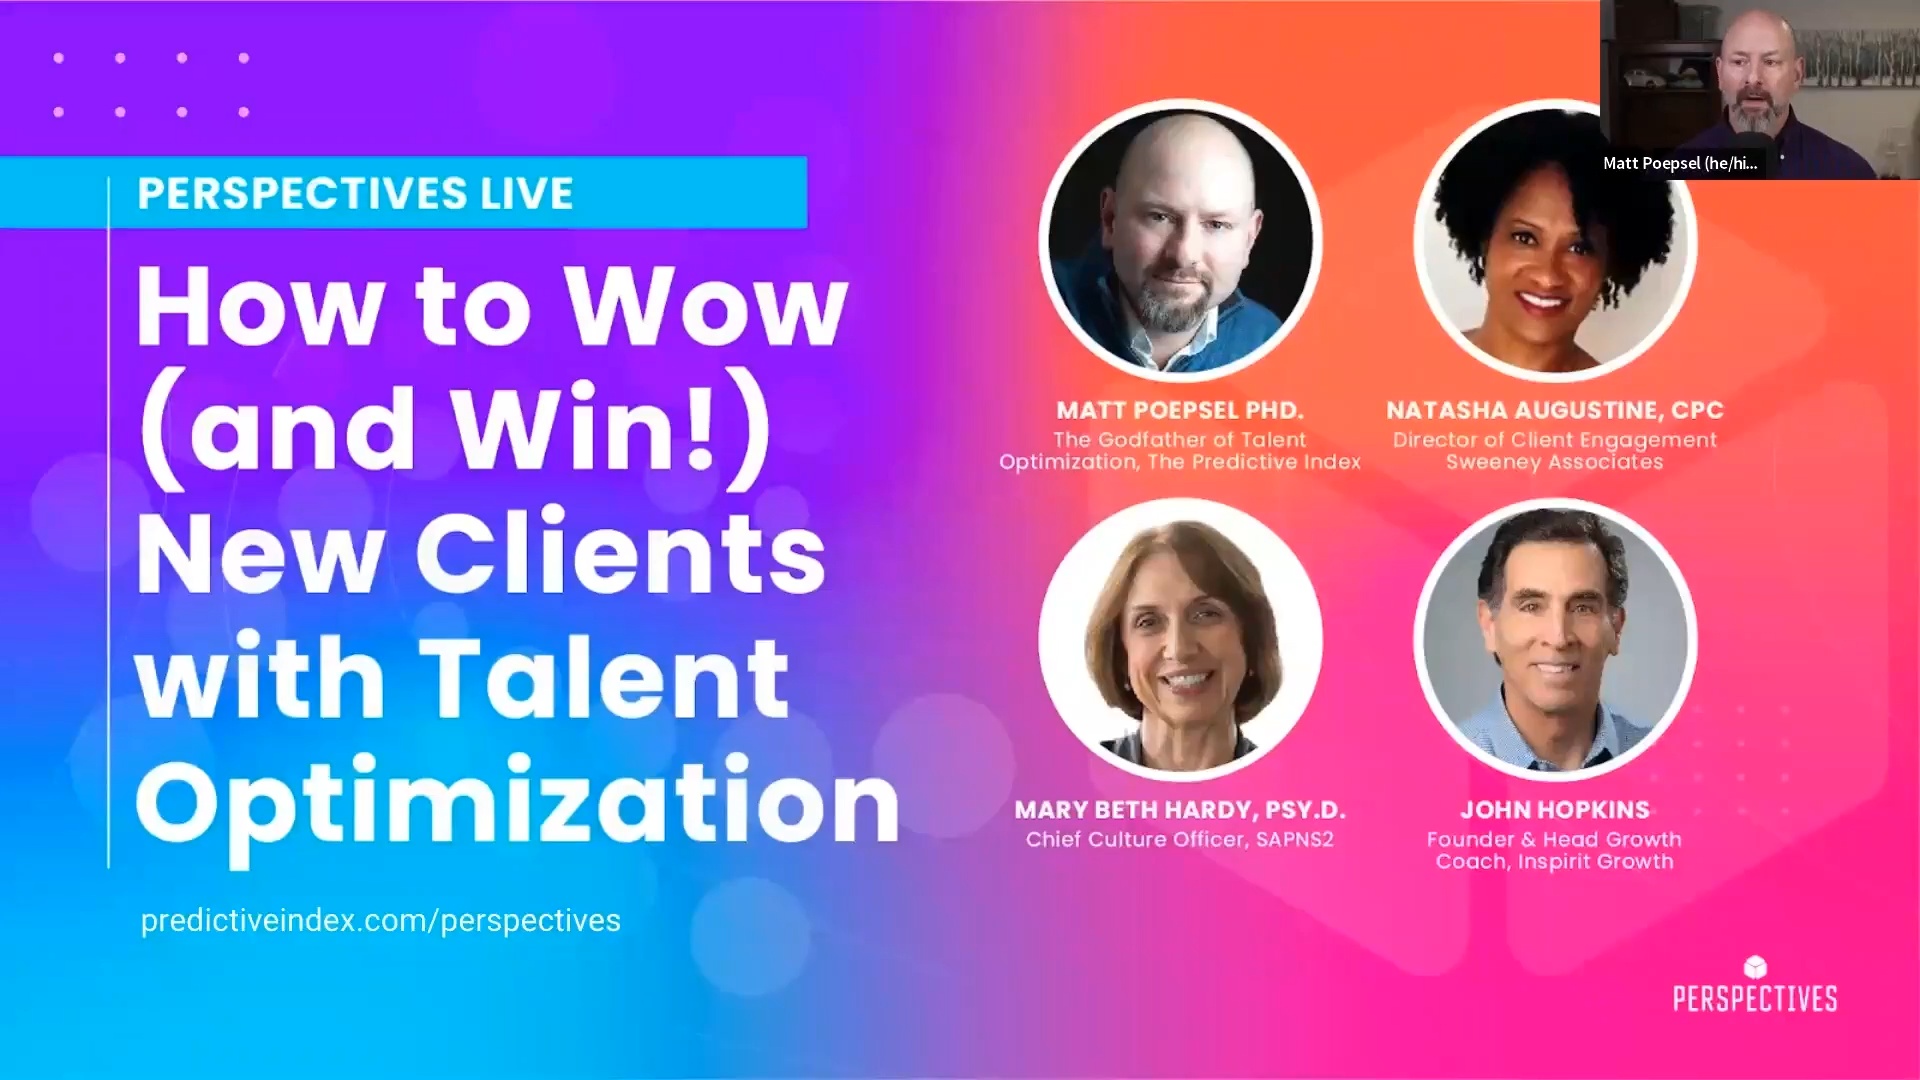 How to Wow (and Win!) New Clients with Talent Optimization